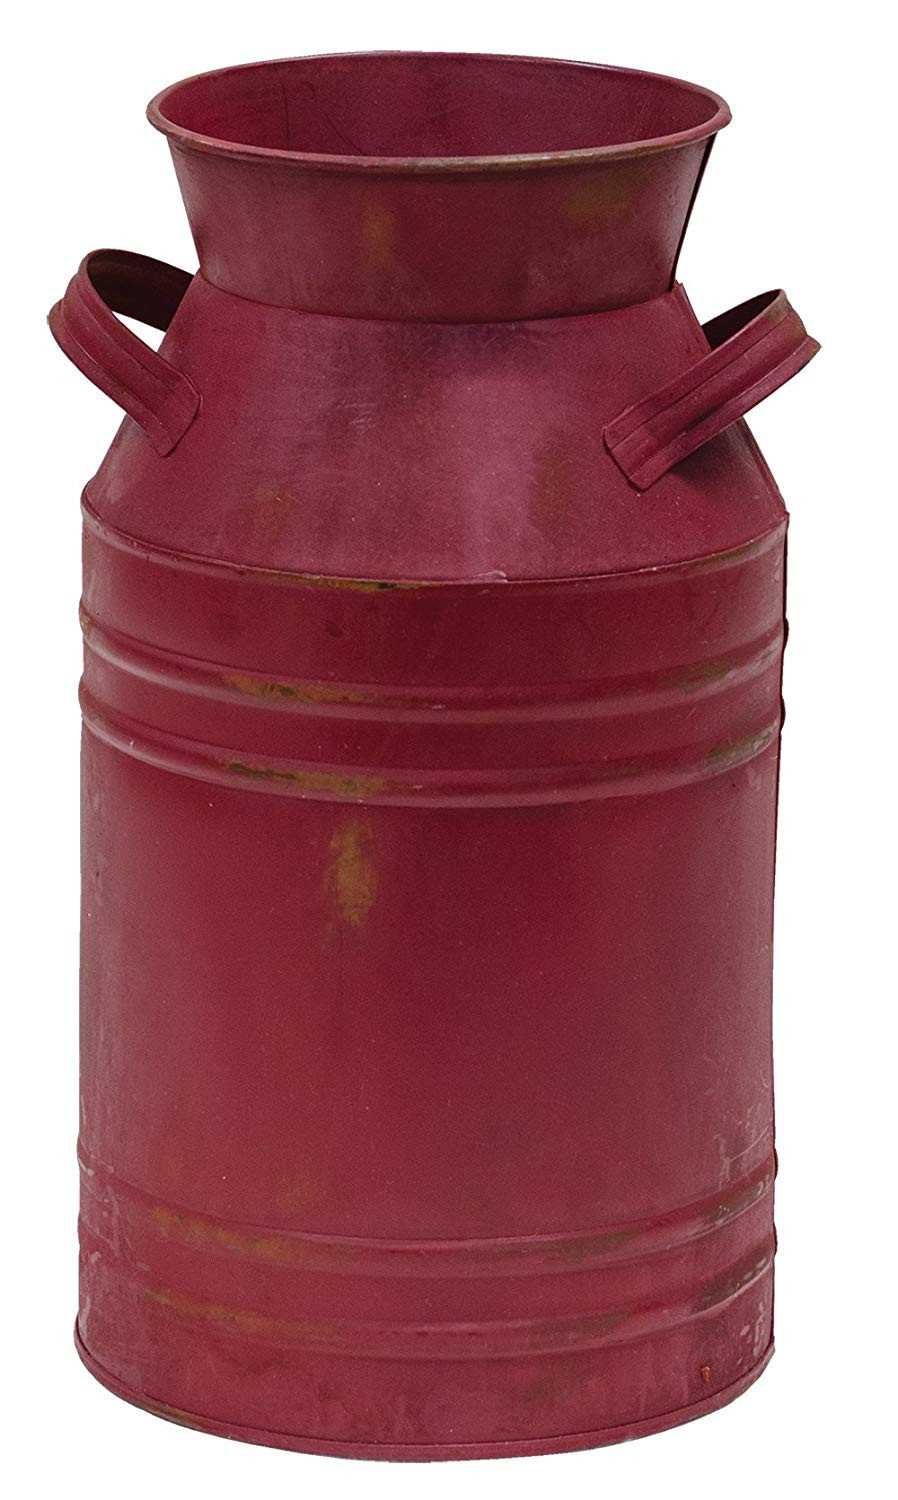 30 Spectacular Waterford Honey Bud Vase 2024 free download waterford honey bud vase of amazon com metal milk can 11 burgundy finish country rustic for amazon com metal milk can 11 burgundy finish country rustic jug vase home decor home kitchen